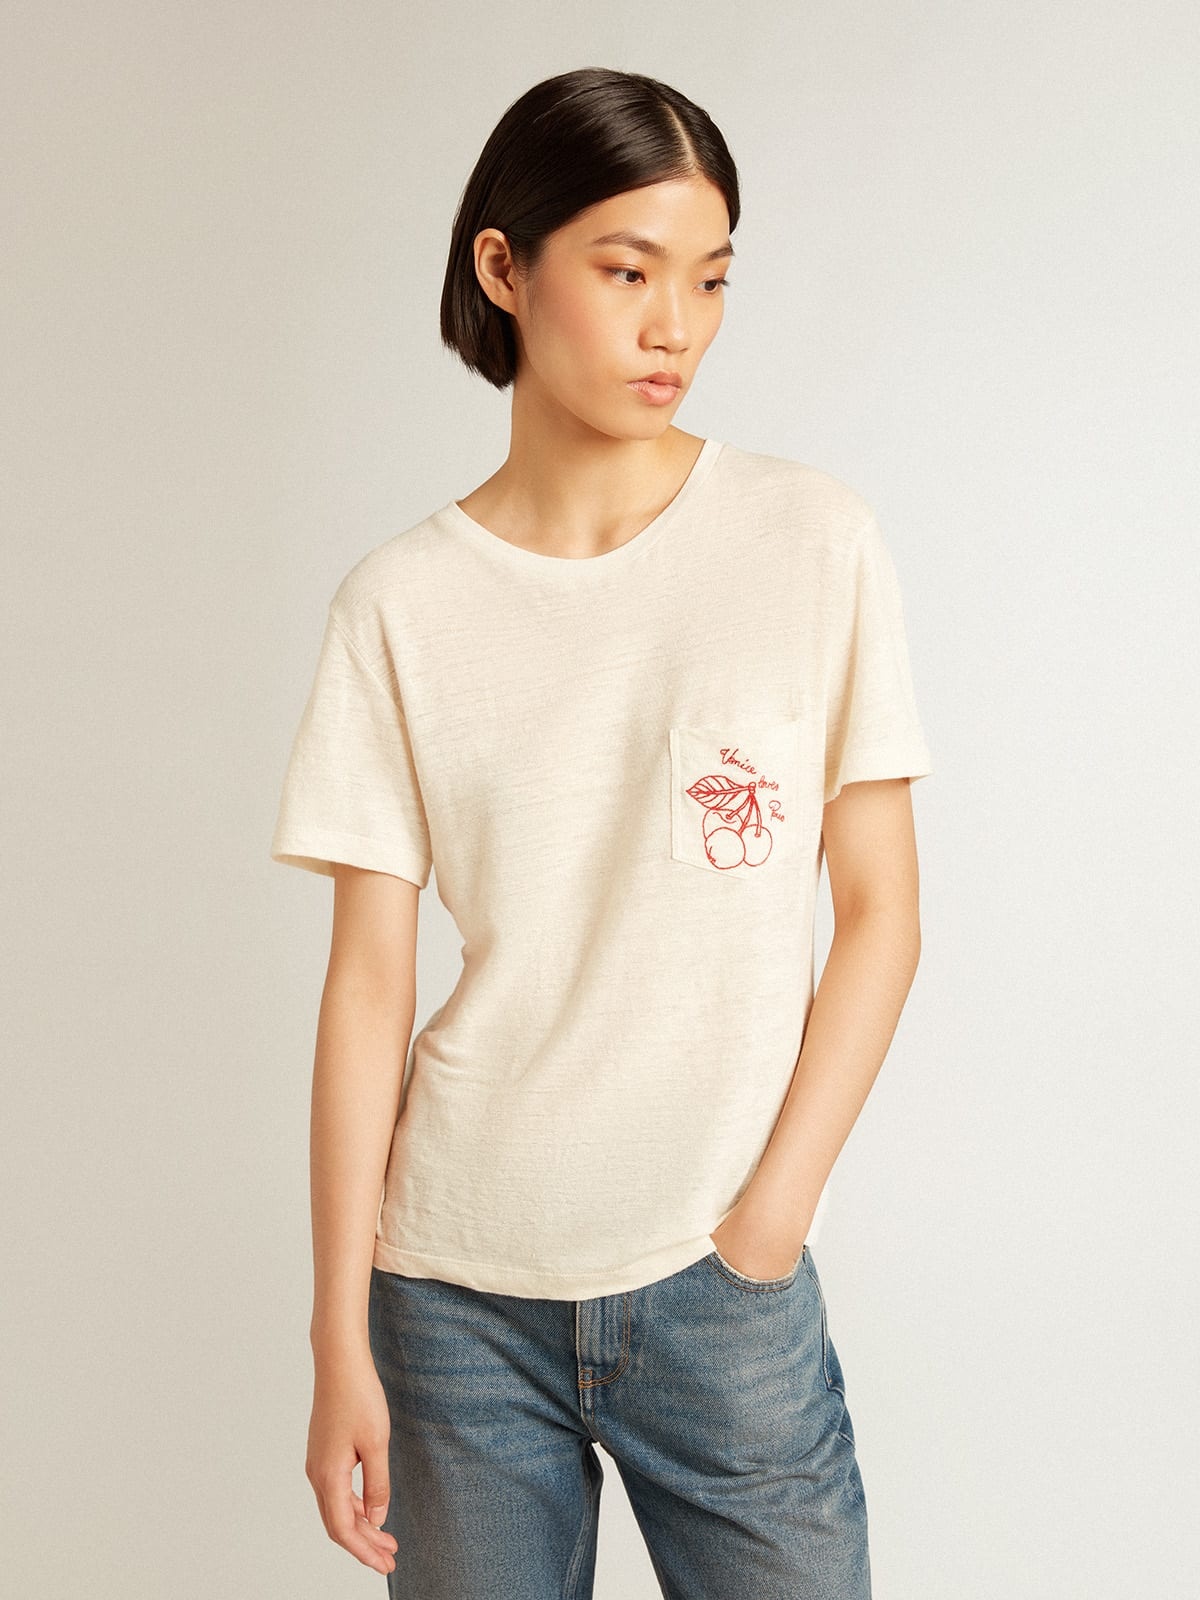 Women’s cotton T-shirt in aged white with embroidered pocket - 2